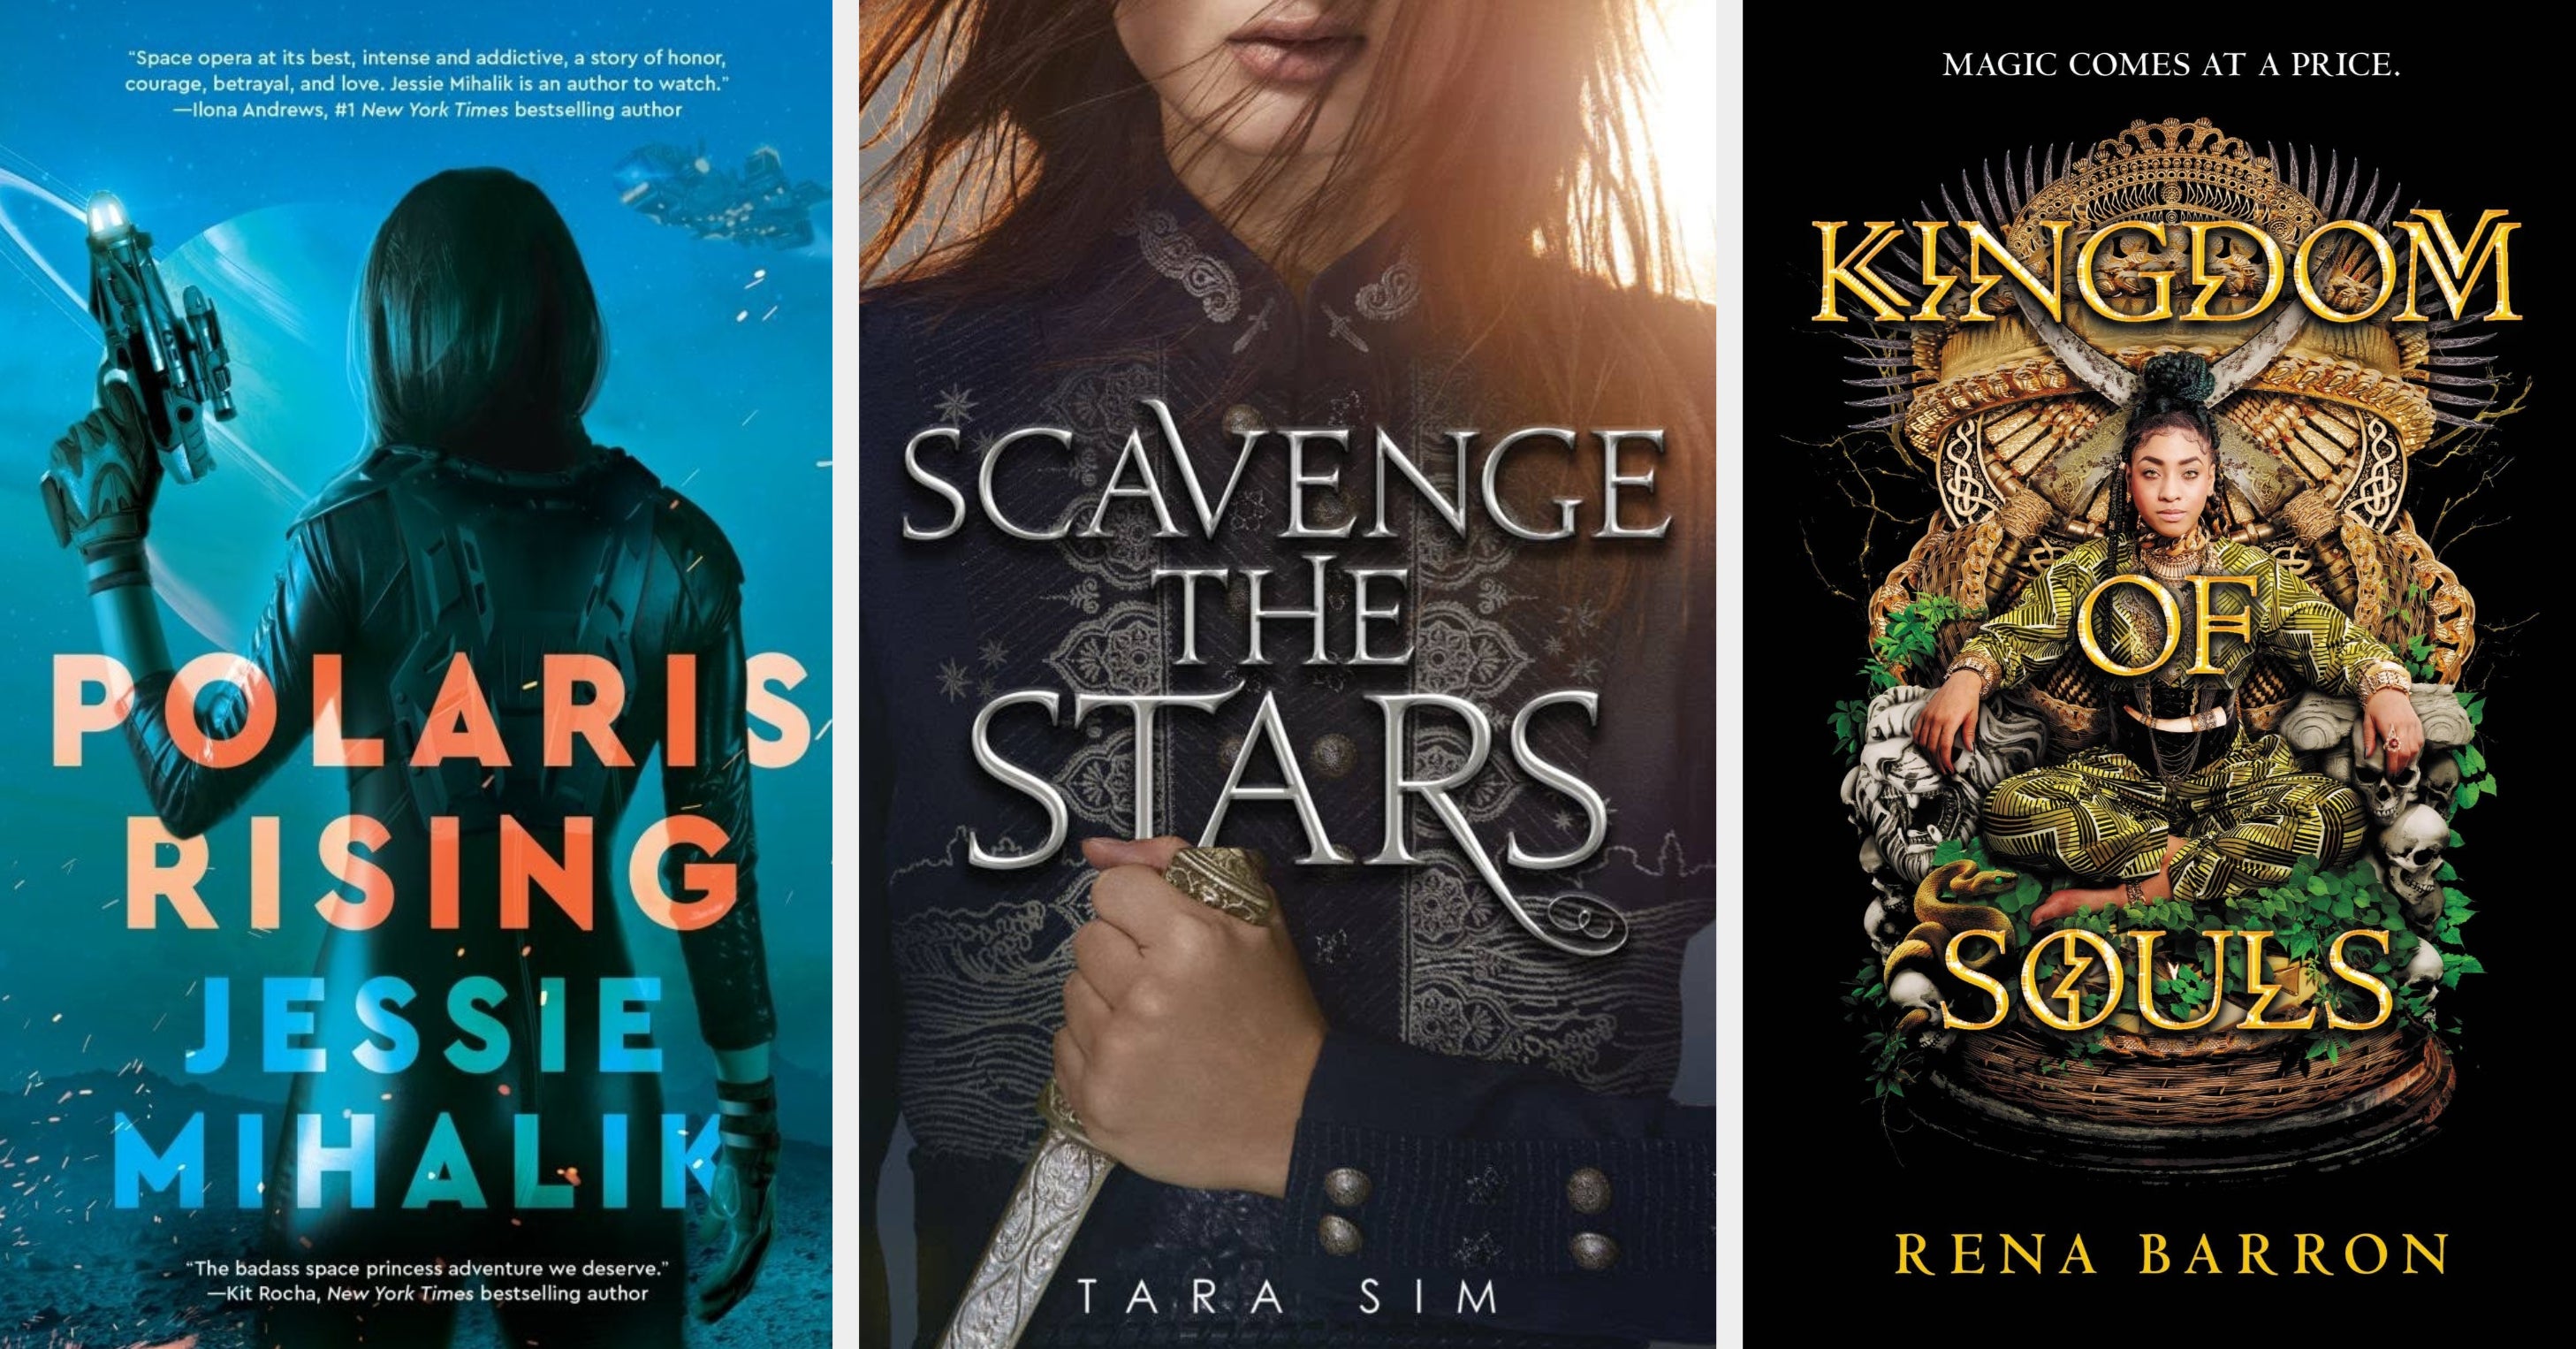 36 Cozy and Feel-Good Fantasy and Sci-Fi Books - Goodreads News